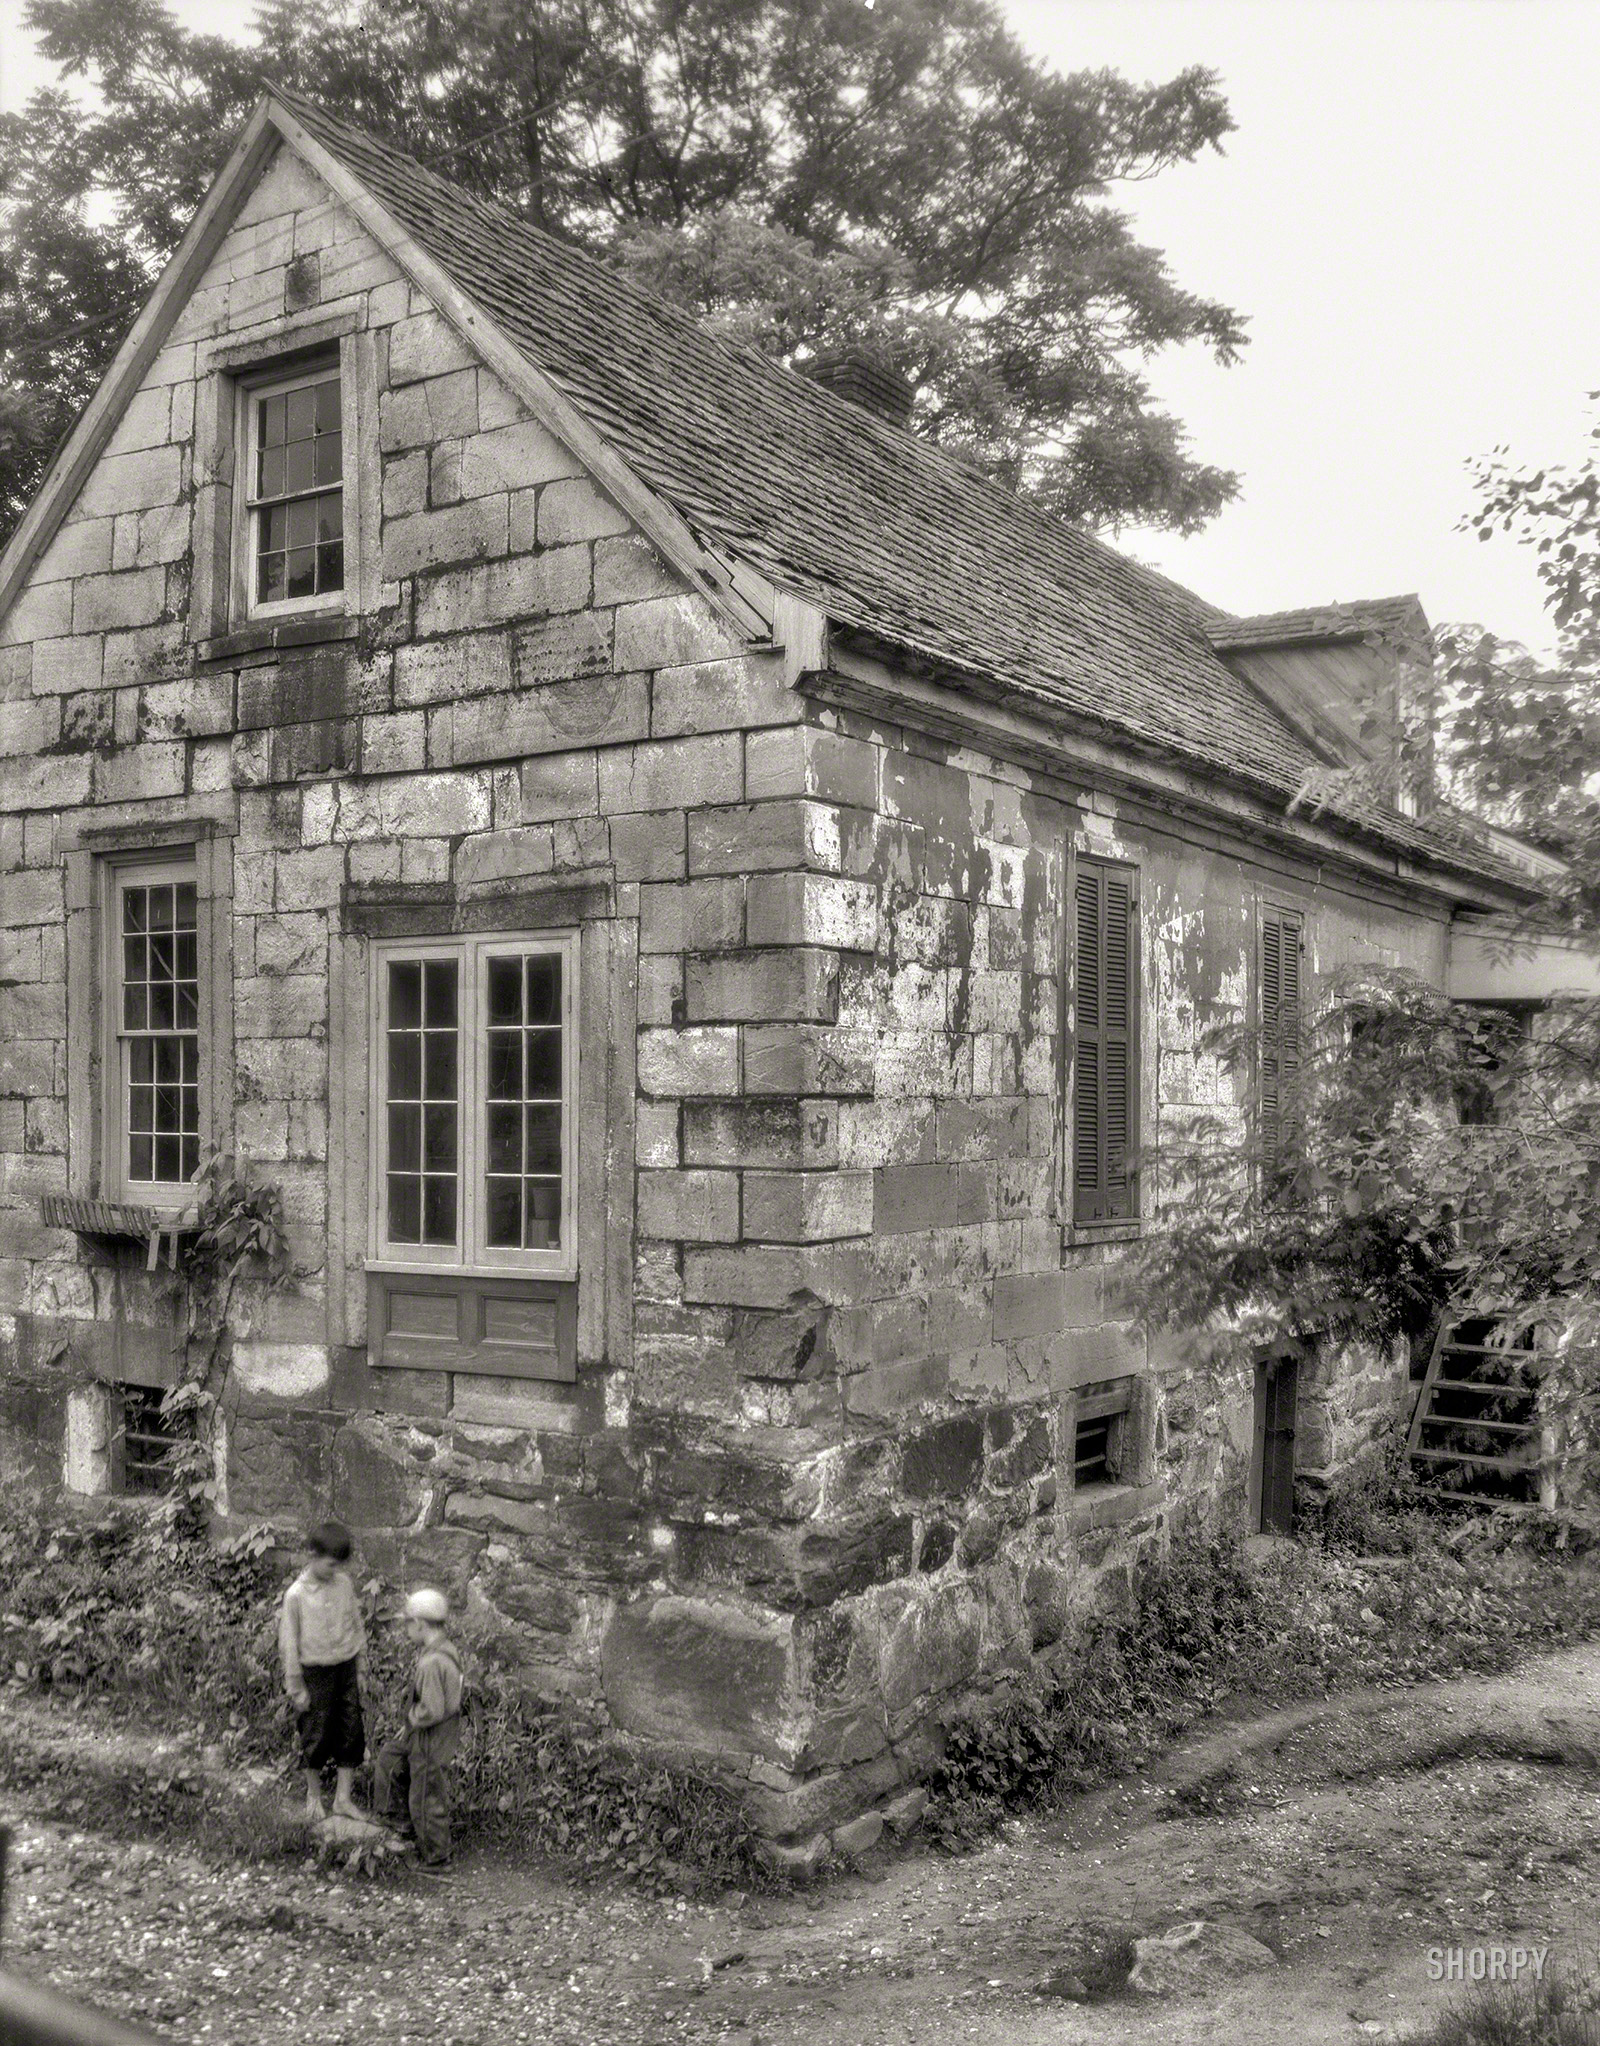 Circa 1927. "Old Stone Bakery, Falmouth, Stafford County, Virginia." 8x10 inch acetate negative by Frances Benjamin Johnston. View full size.